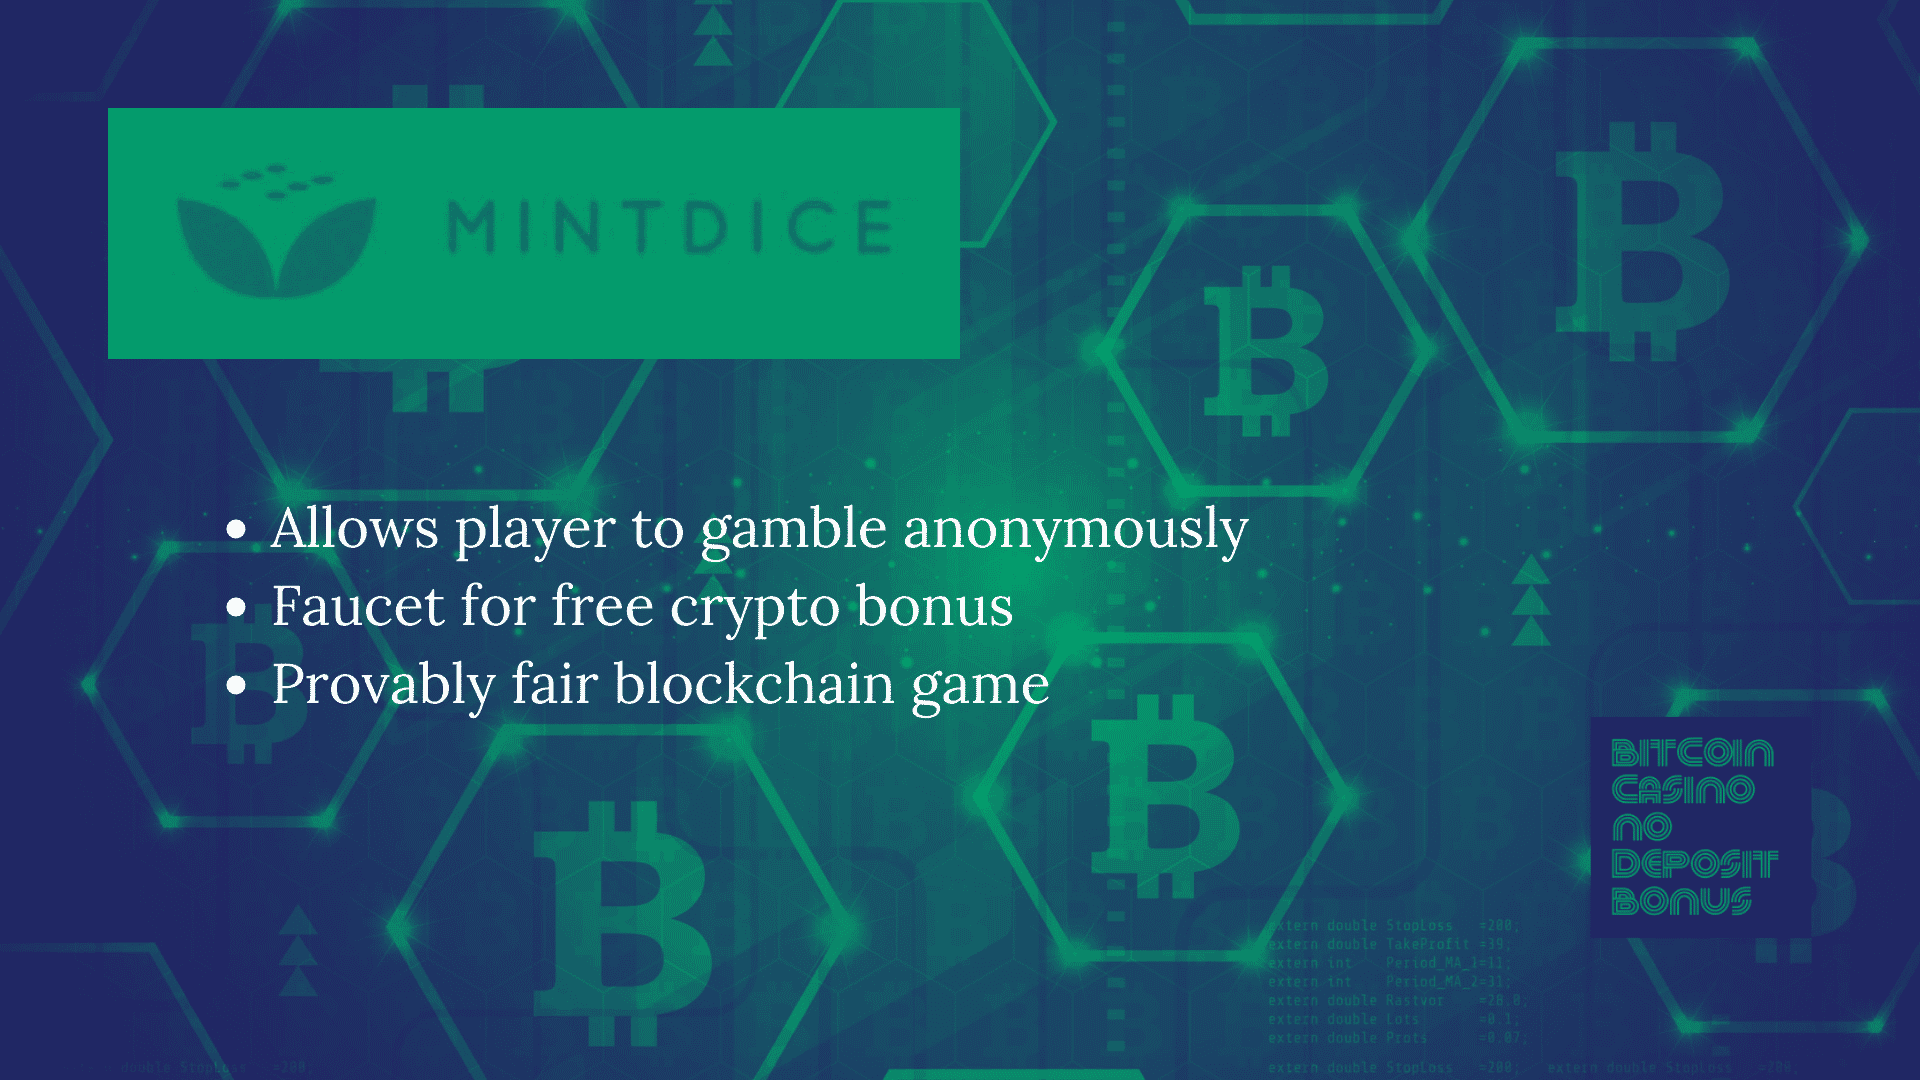 You are currently viewing Mint Dice Bonus Codes – Mintdice.com Free Coupons June 2022